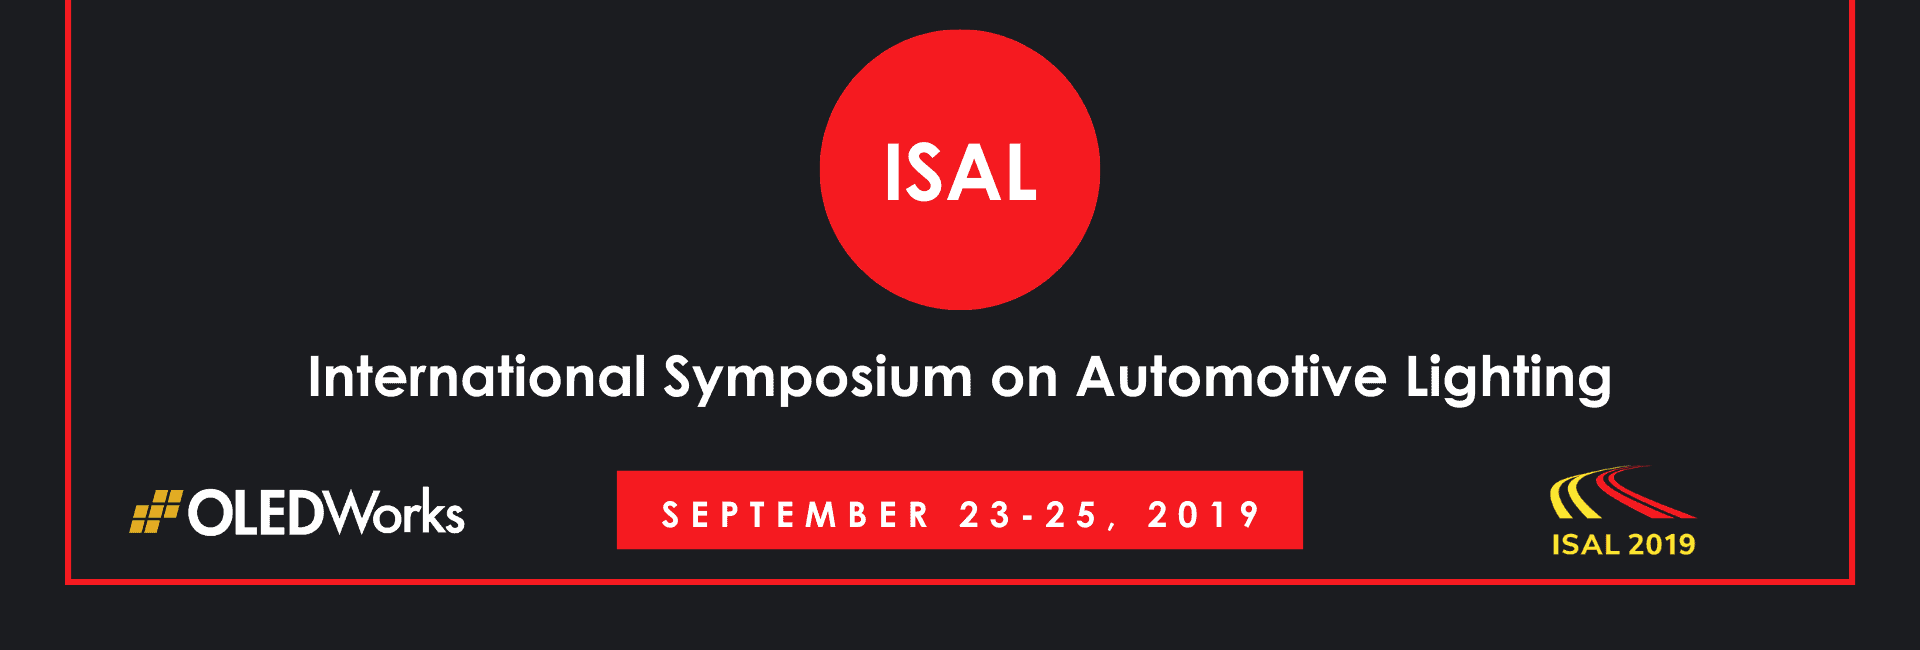 ISAL19 - OLED Light Technology and the Cars of Tomorrow